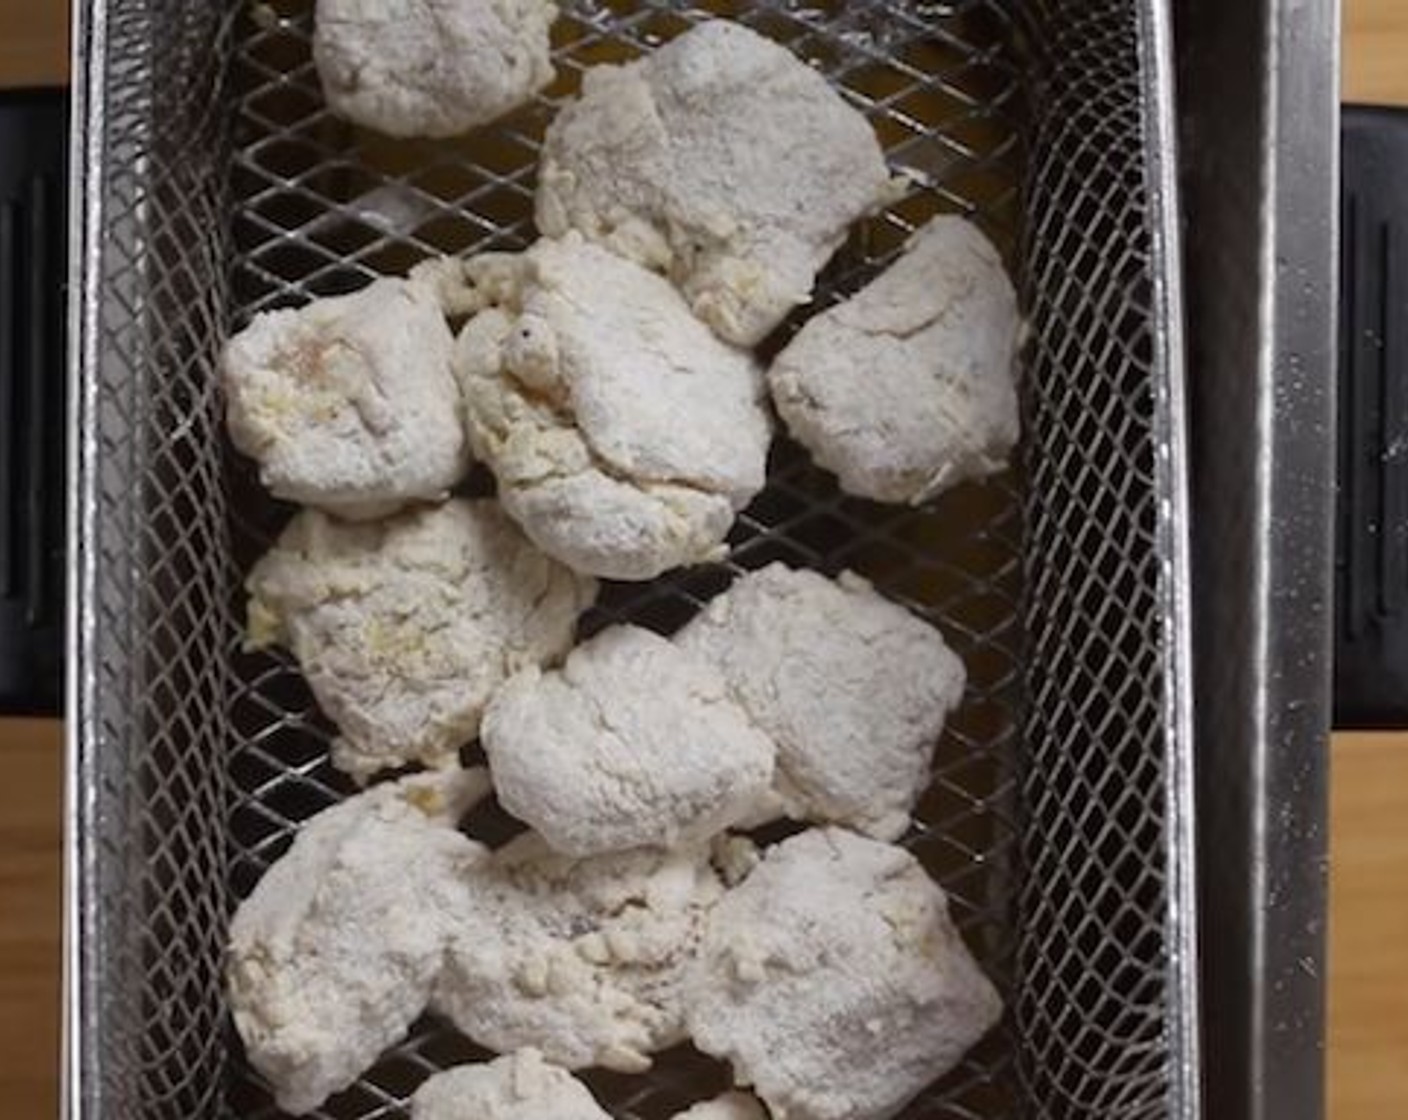 step 5 Transfer the coated chicken chunks to a fryer or deep pot with Vegetable Oil (as needed) set to 350 degrees F (180 degrees C).